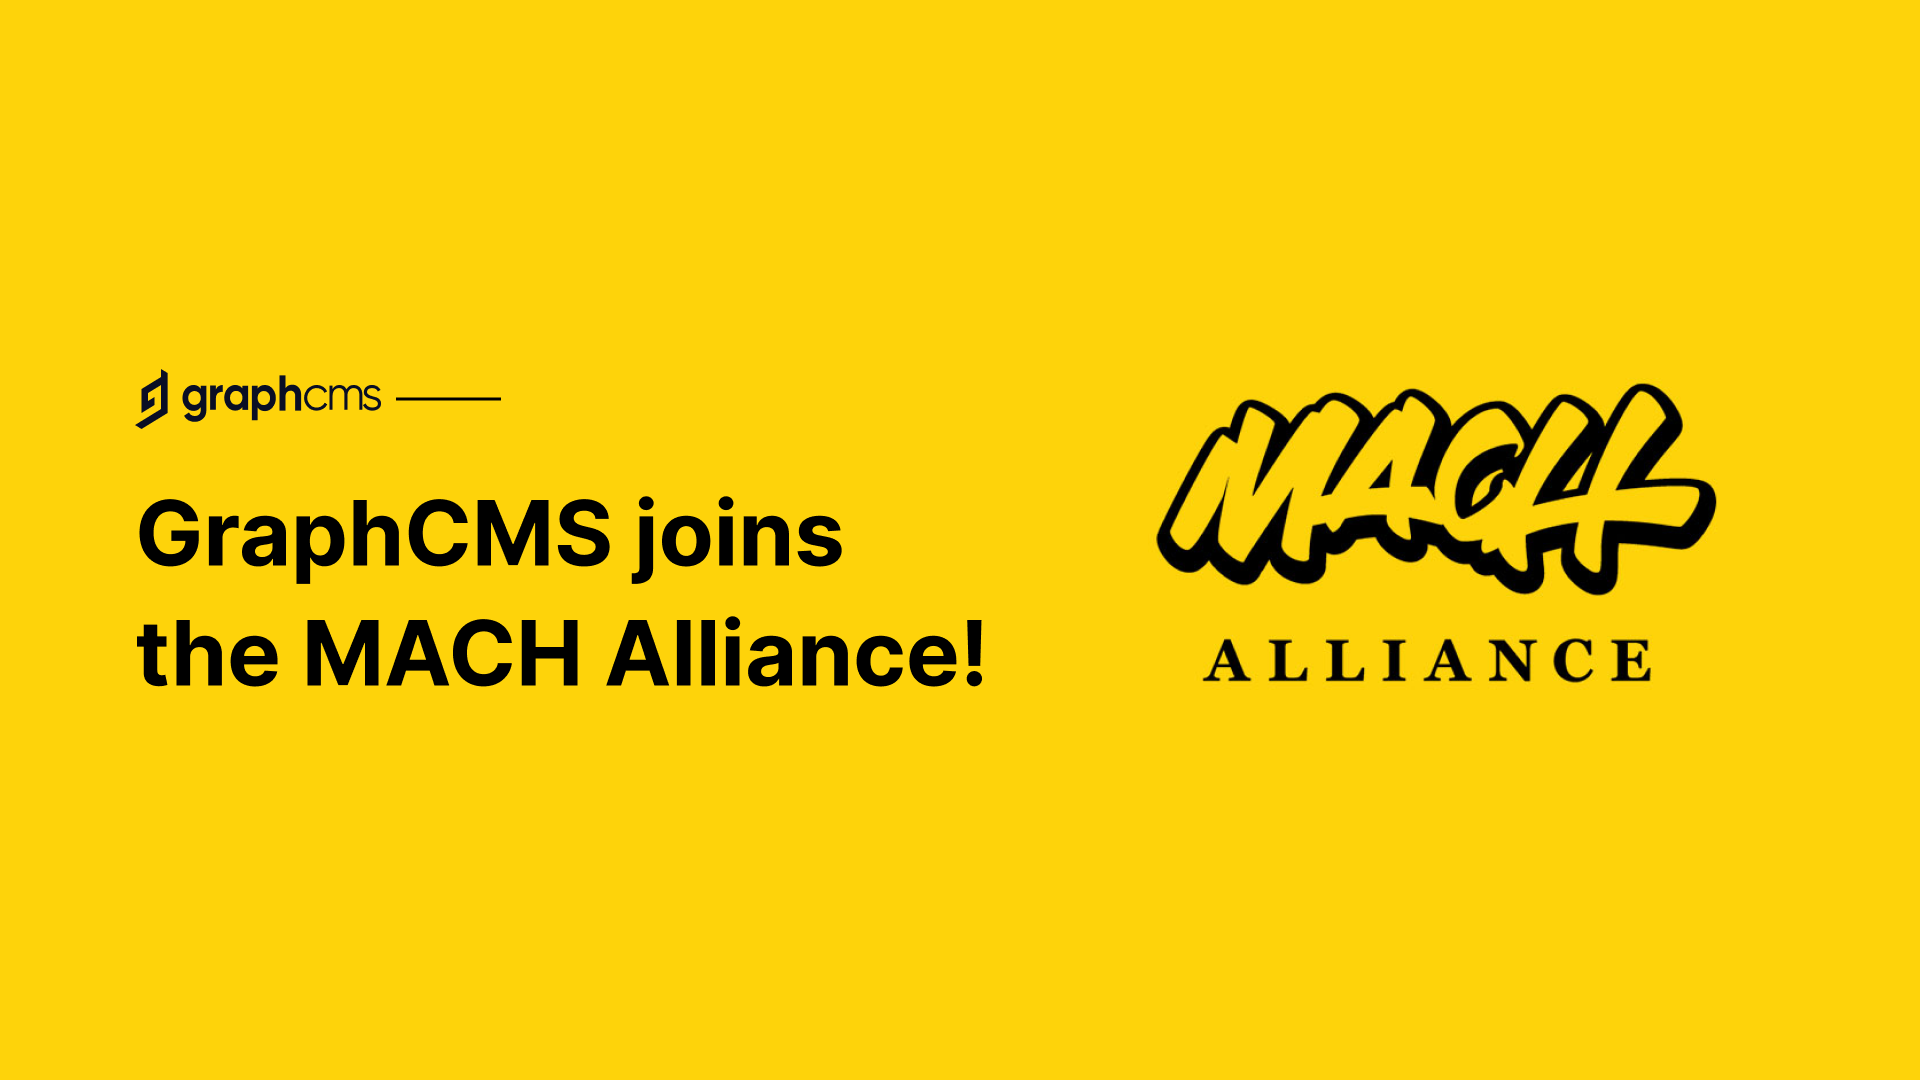 Hygraph Joins the MACH Alliance to Federate the Content Layer